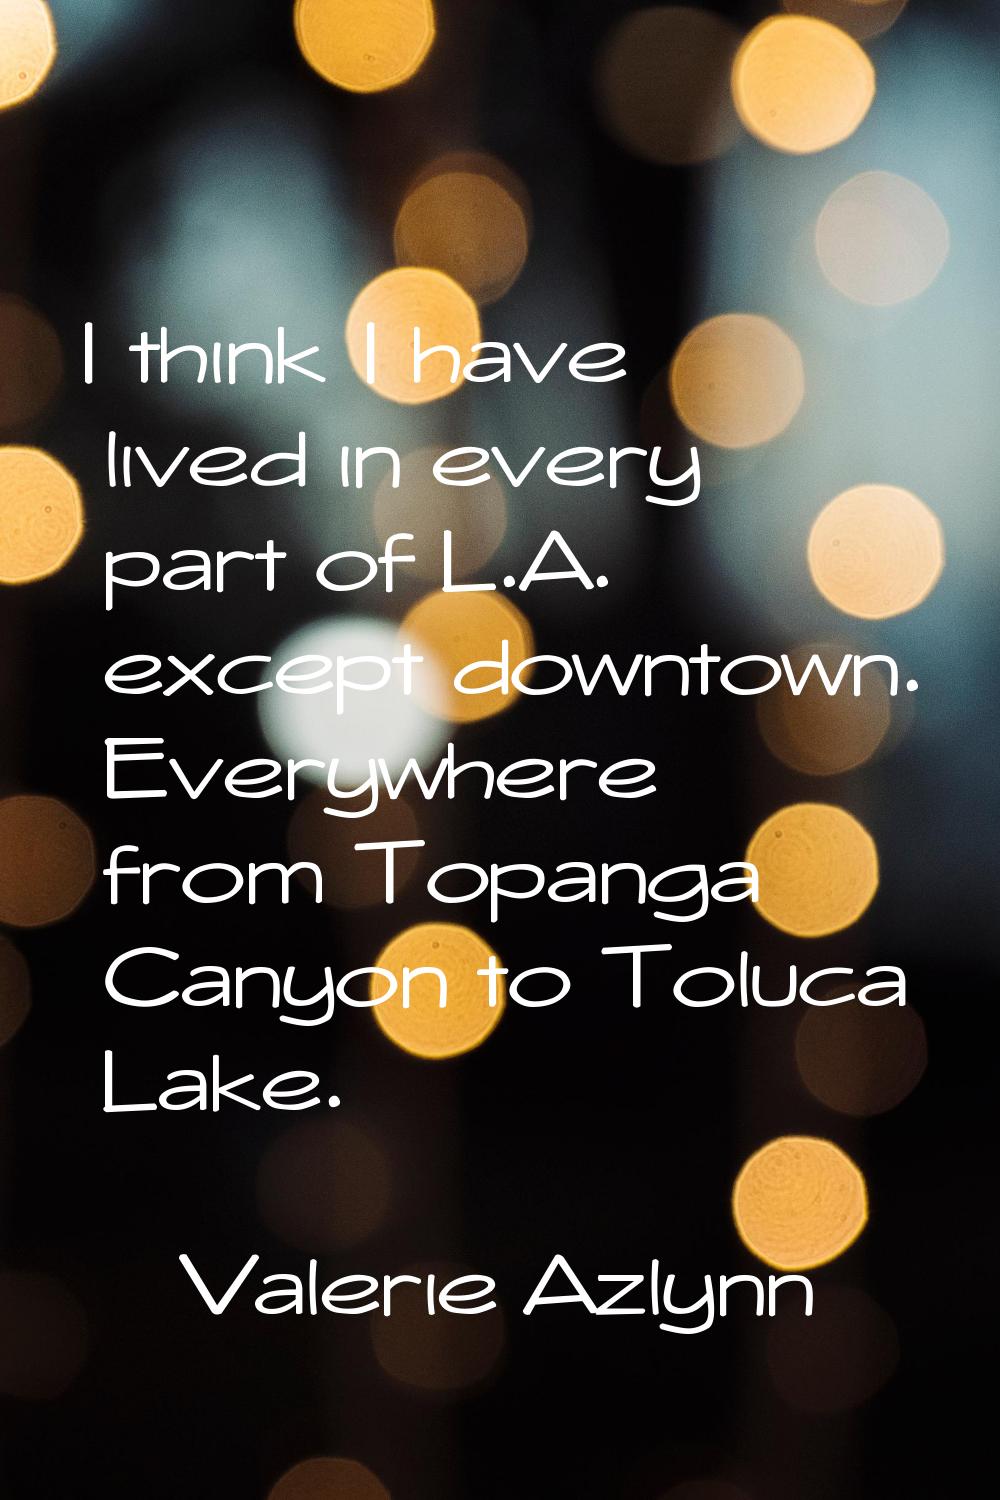 I think I have lived in every part of L.A. except downtown. Everywhere from Topanga Canyon to Toluc